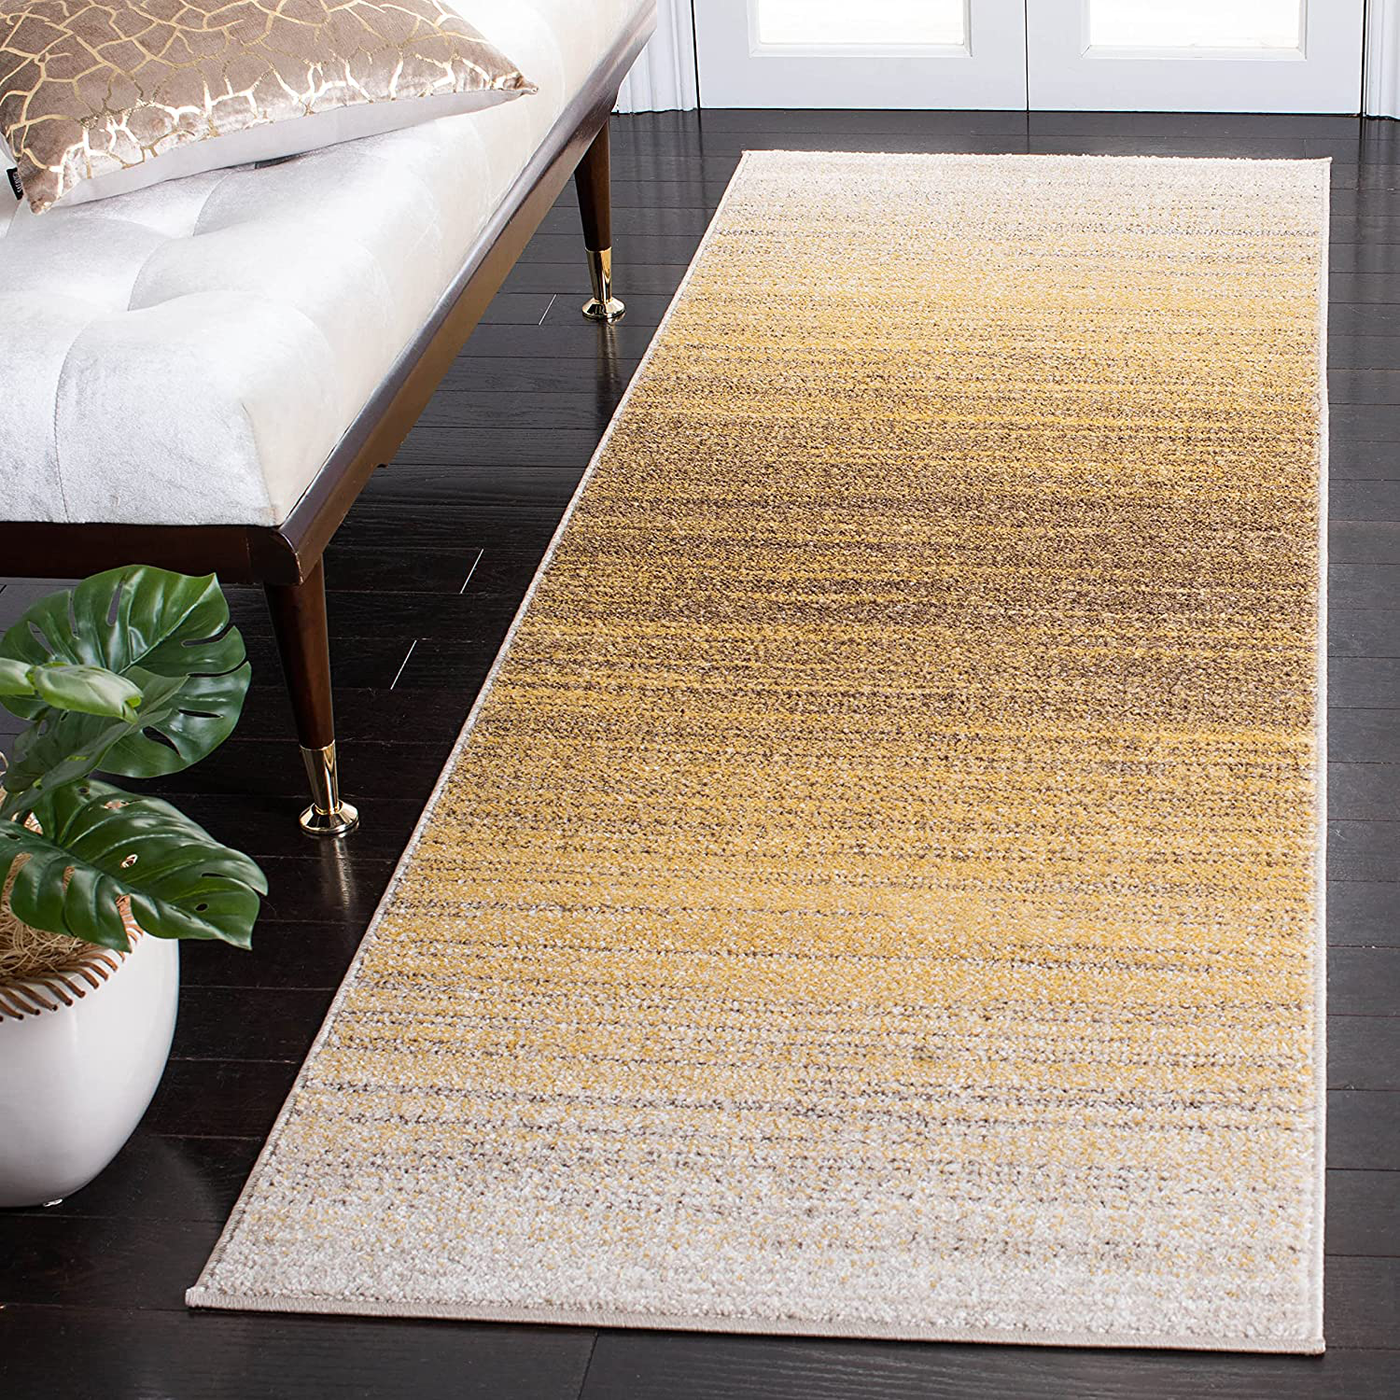 Safavieh Adirondack Collection ADR142D Modern Ombre Runner, 2'6" x 6' , Gold / Ivory